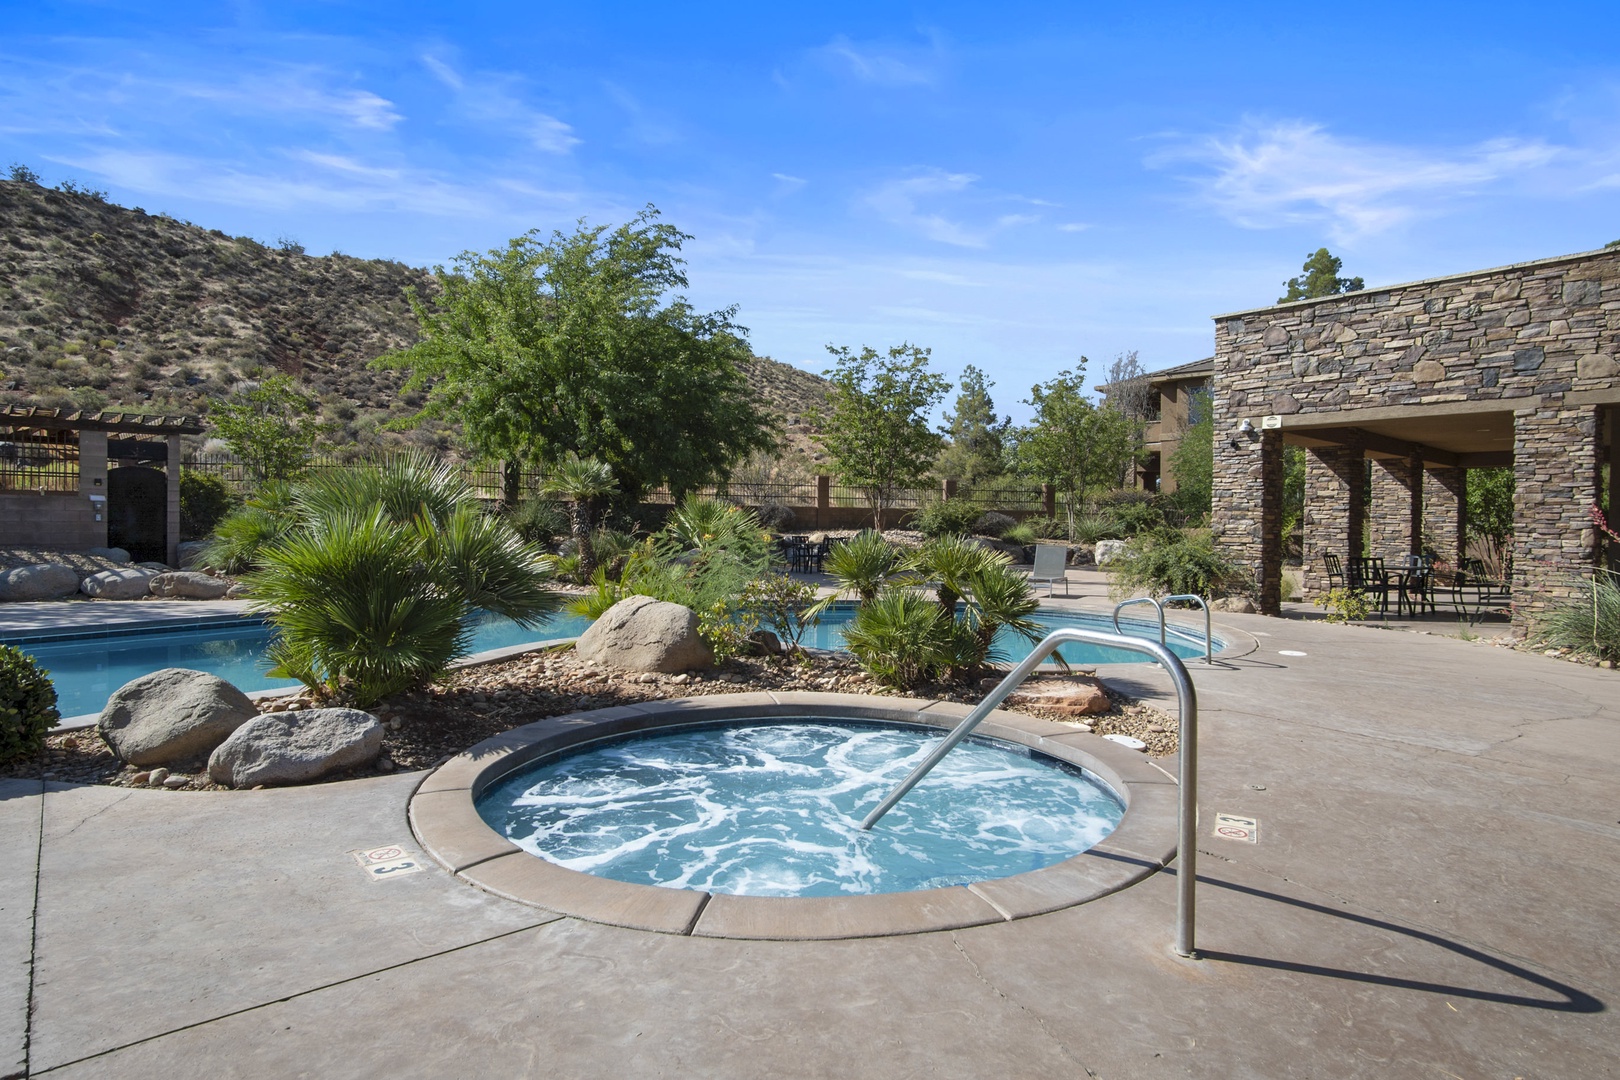 Outdoor communal pool with hot tub